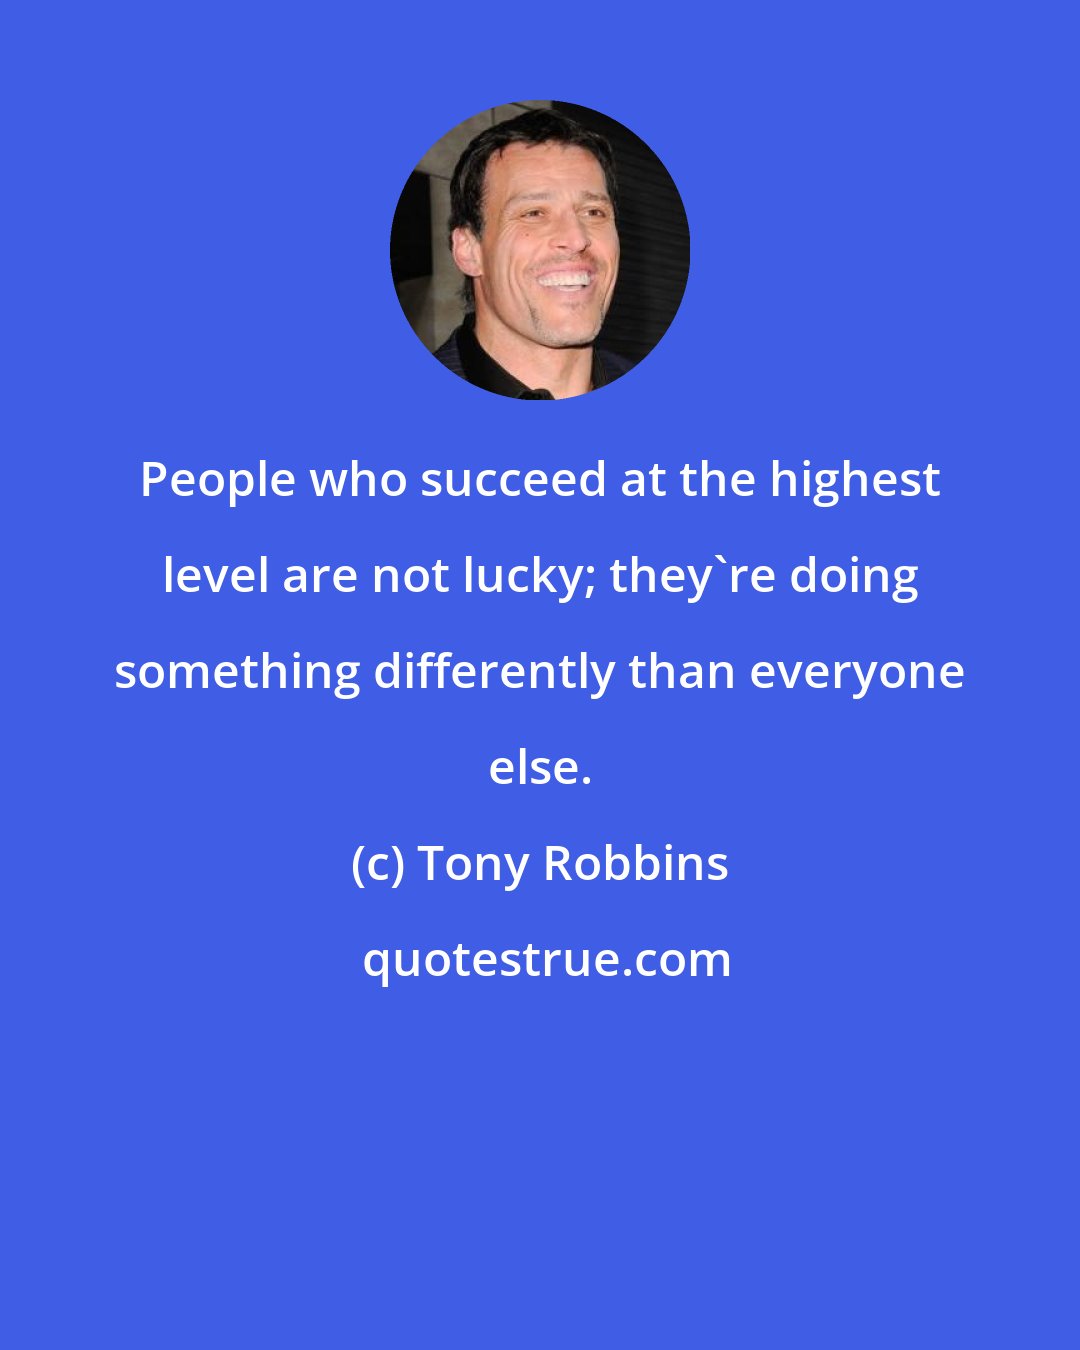 Tony Robbins: People who succeed at the highest level are not lucky; they're doing something differently than everyone else.